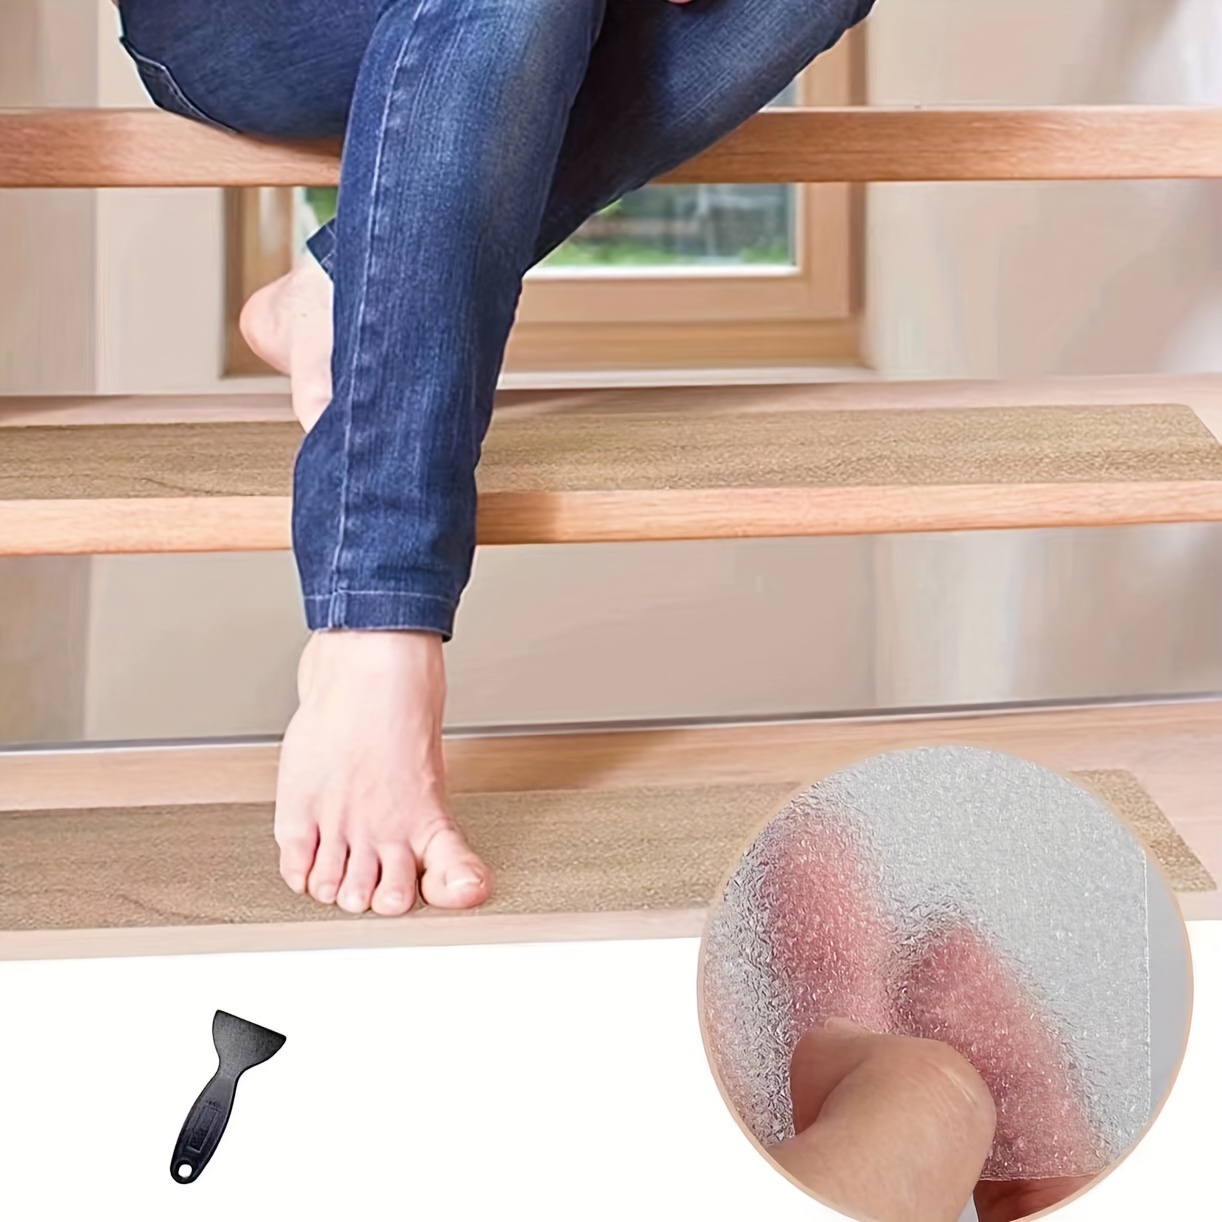 Anti-Slip Tapes are Non-Skid Tapes by American Stair Treads